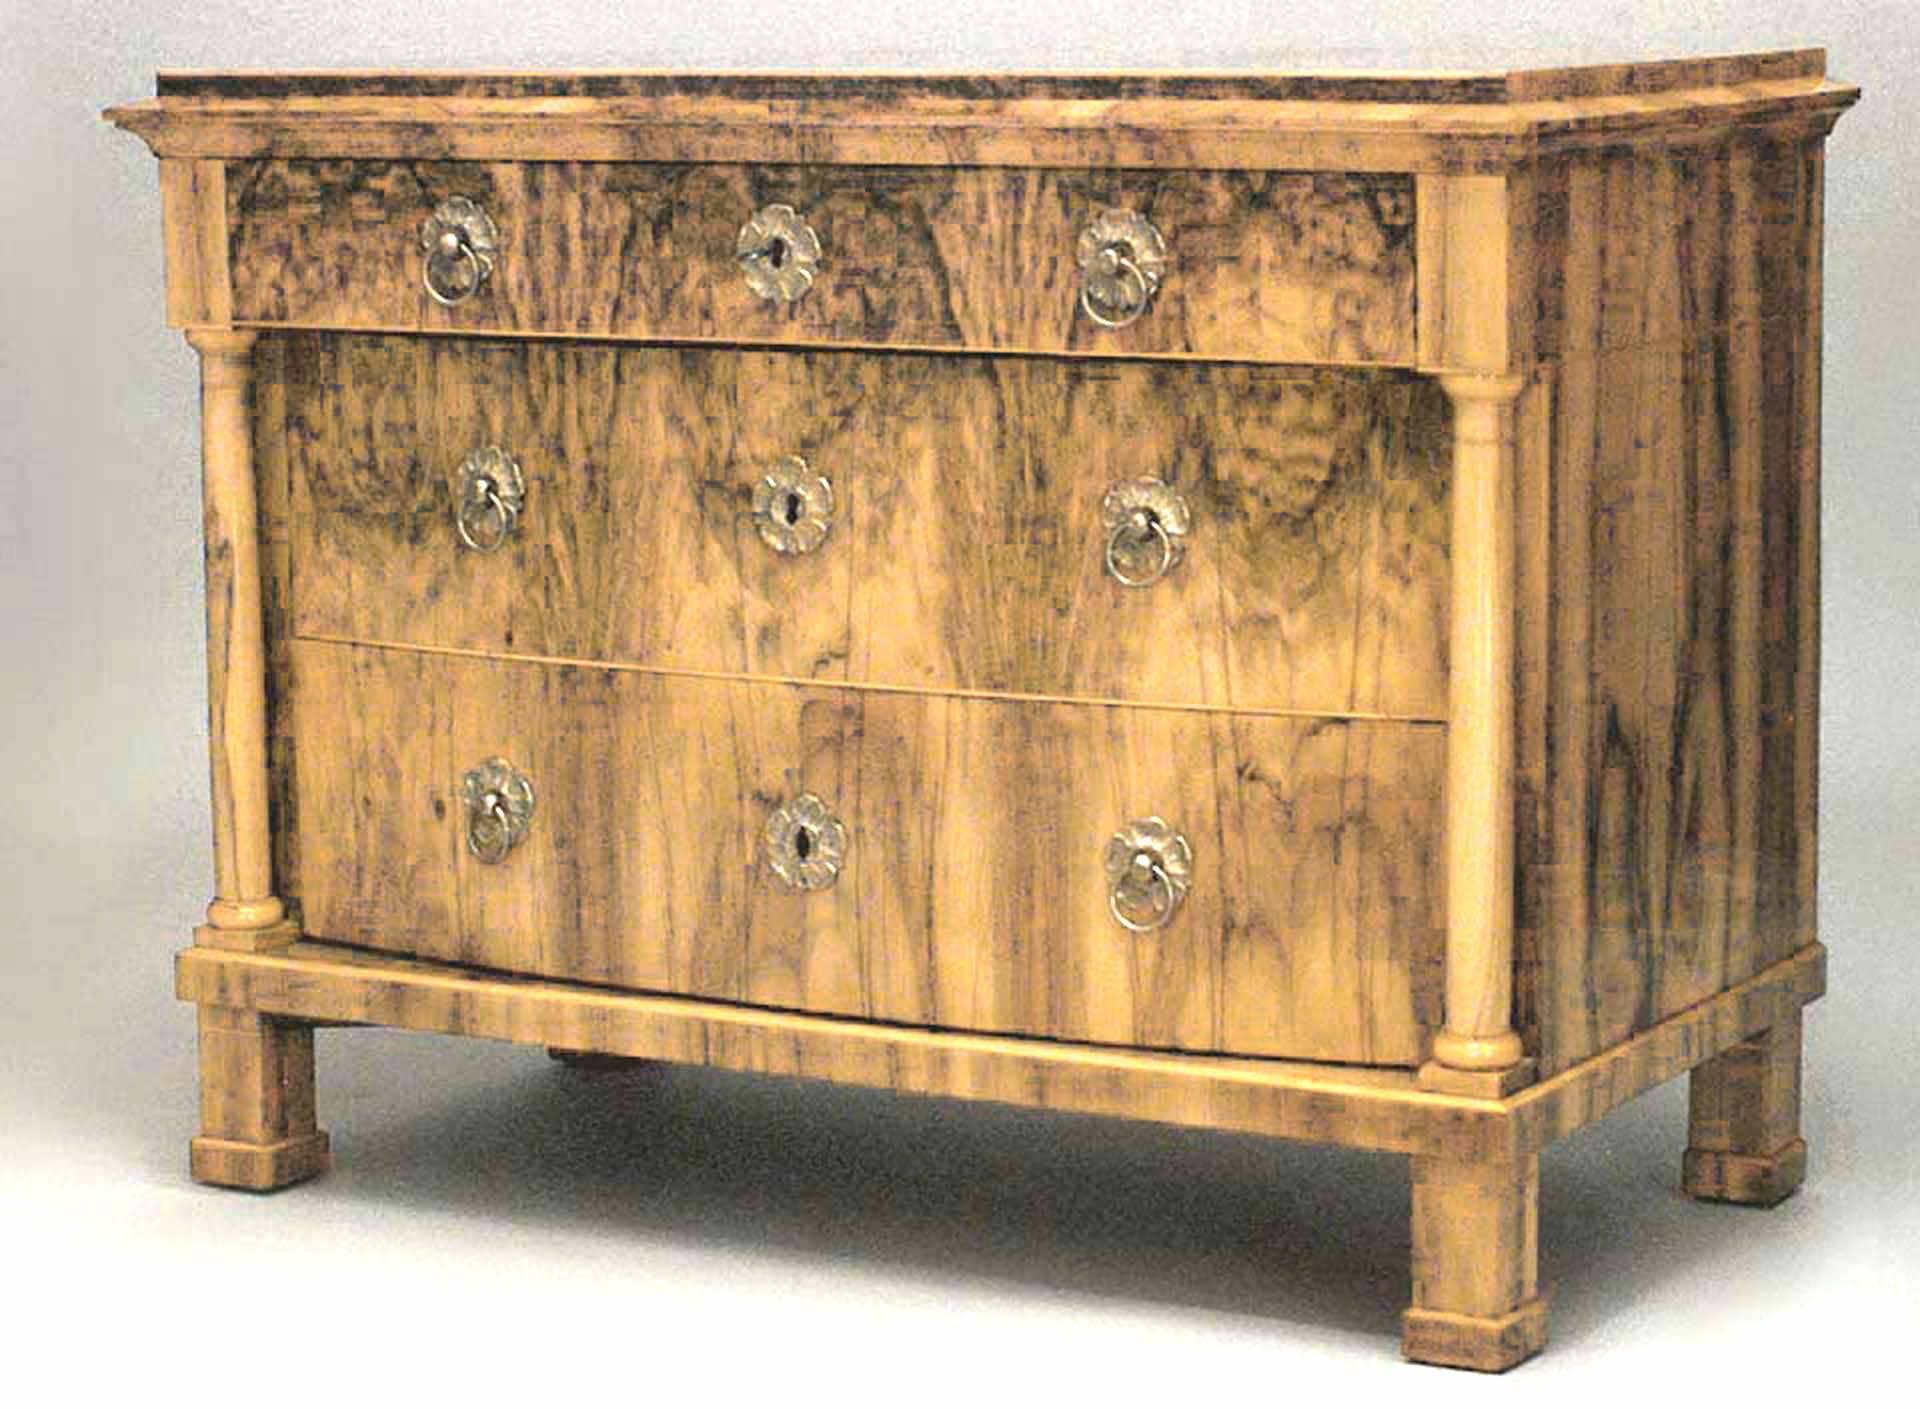 Austrian Biedermeier (Circa 1830) light walnut veneer and maple trimmed 3 drawer chest with demilune shape and column sides with brass handles & hardware.
